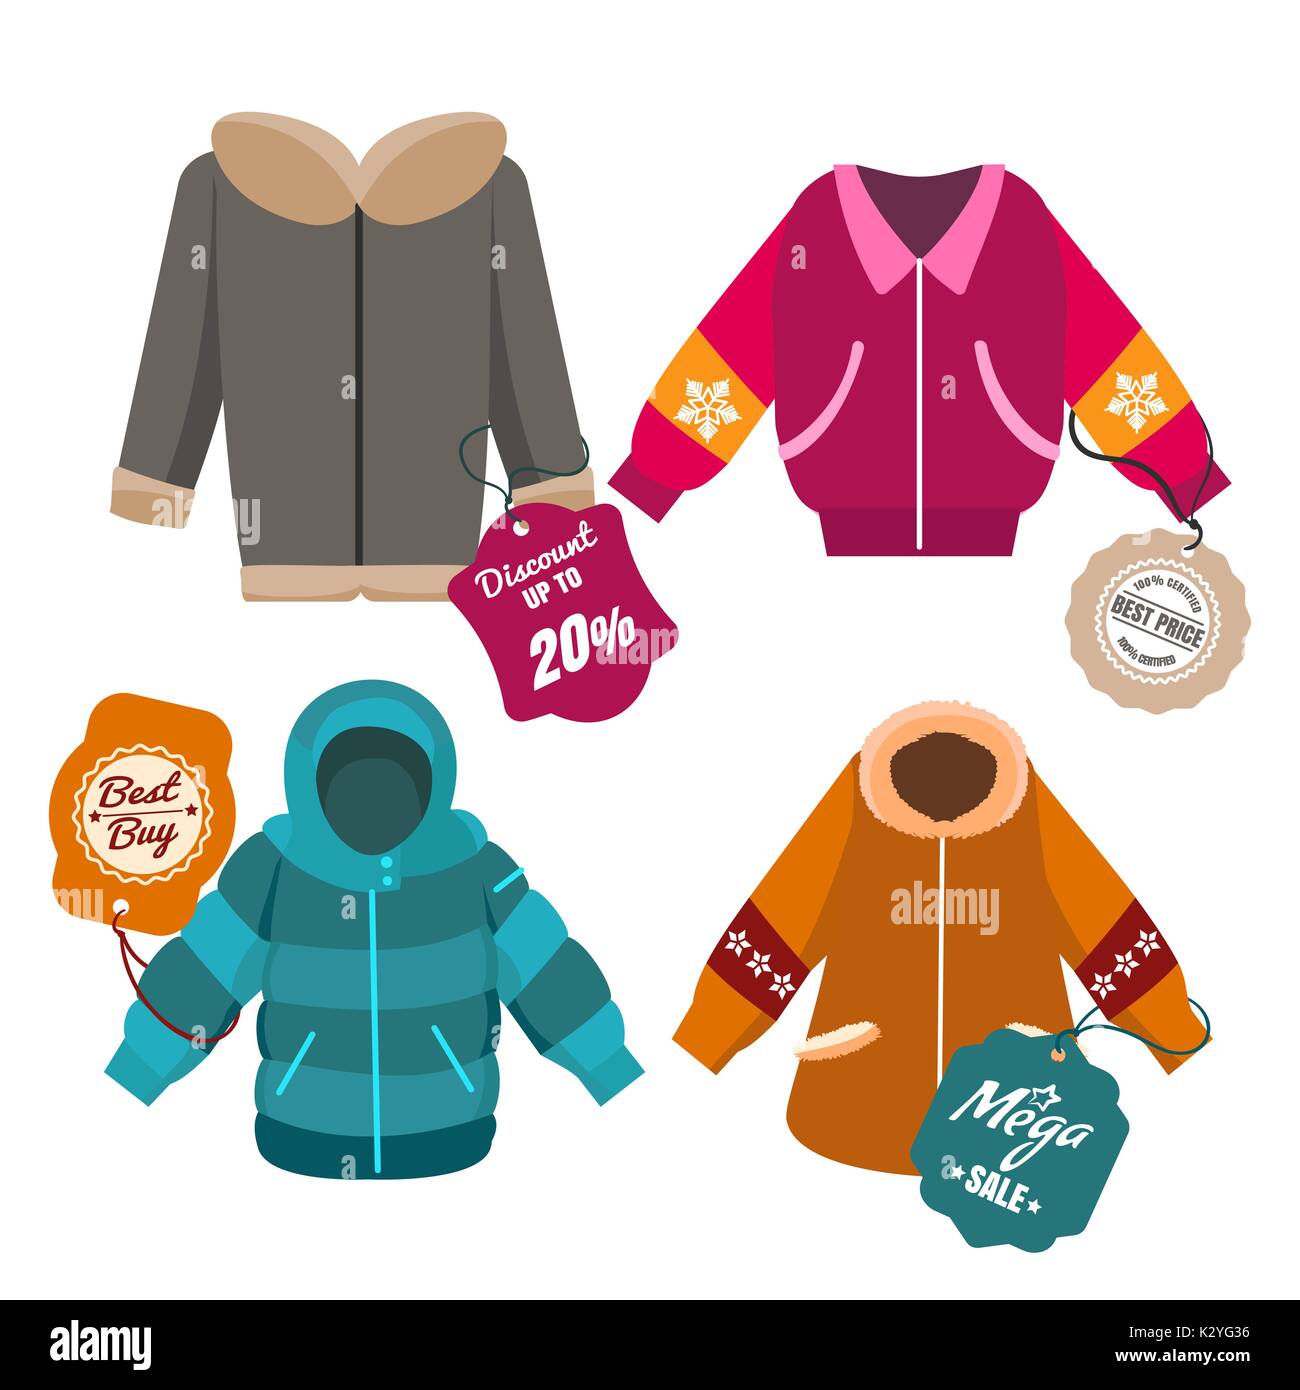 Winter sale coats and jackets with labels, vector illustration Stock Vector